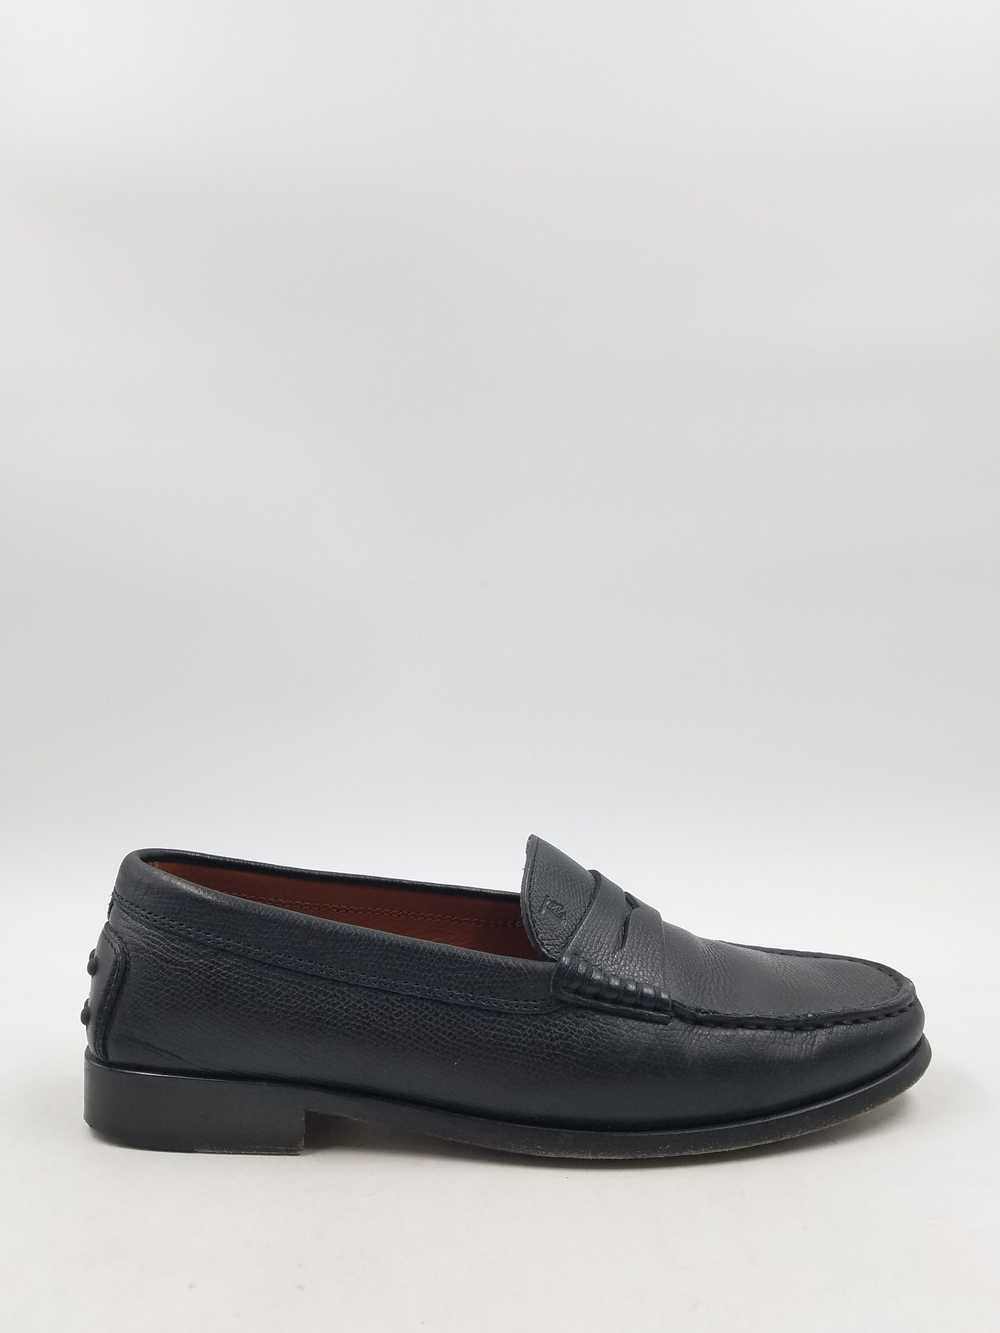 Tod's Black Penny Loafers W 6.5 COA - image 1